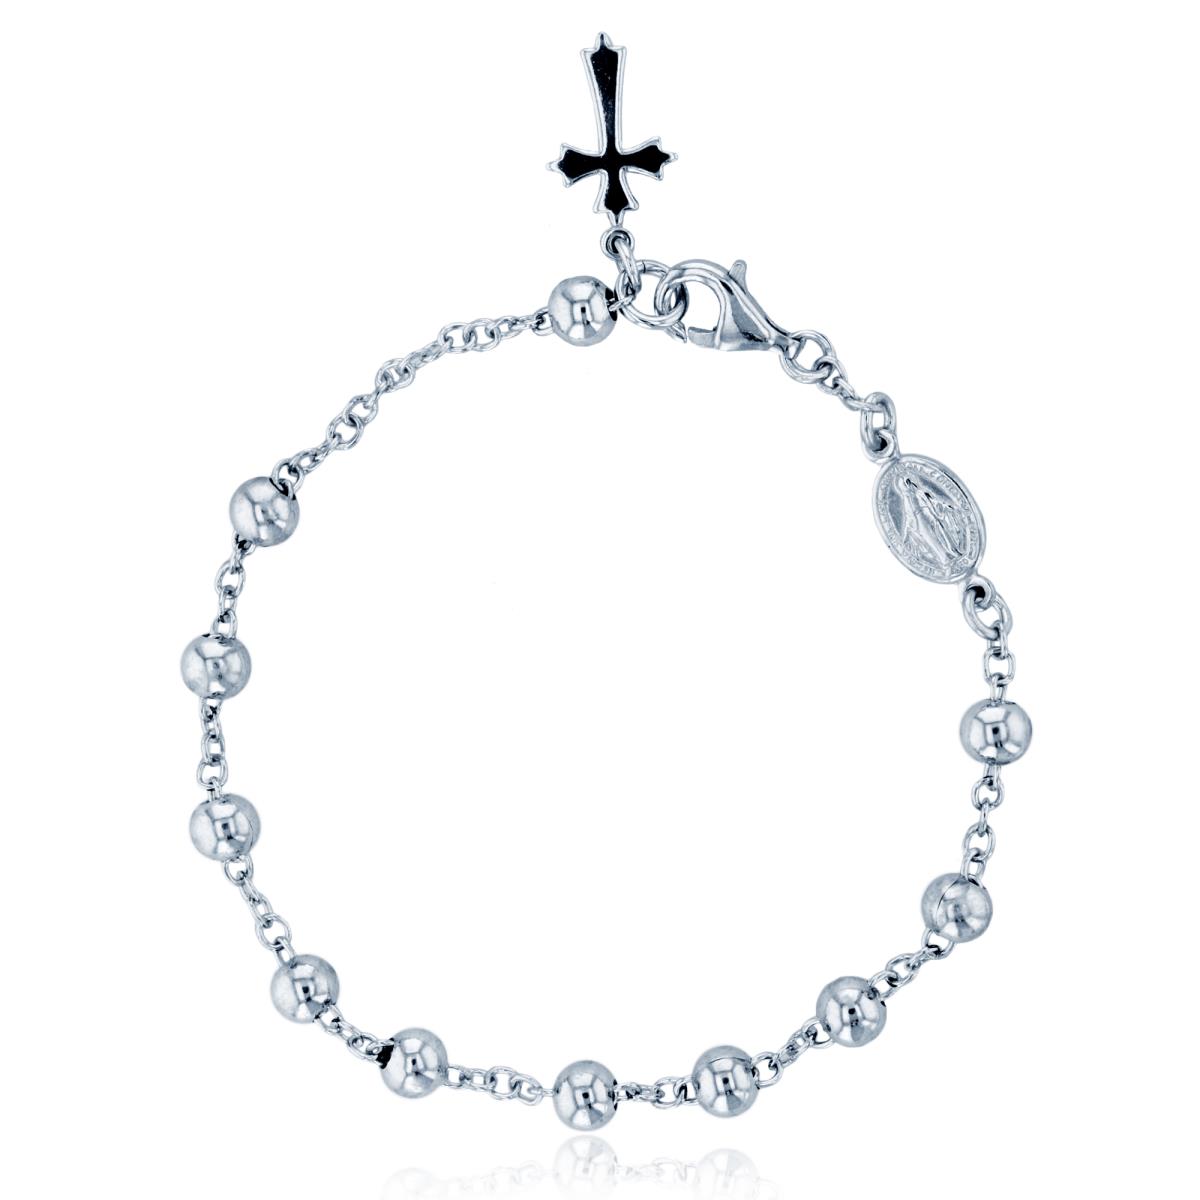 Sterling Silver Rhodium 5mm Beads Virgin Mary 7.5" Bracelet with Dangling Cross